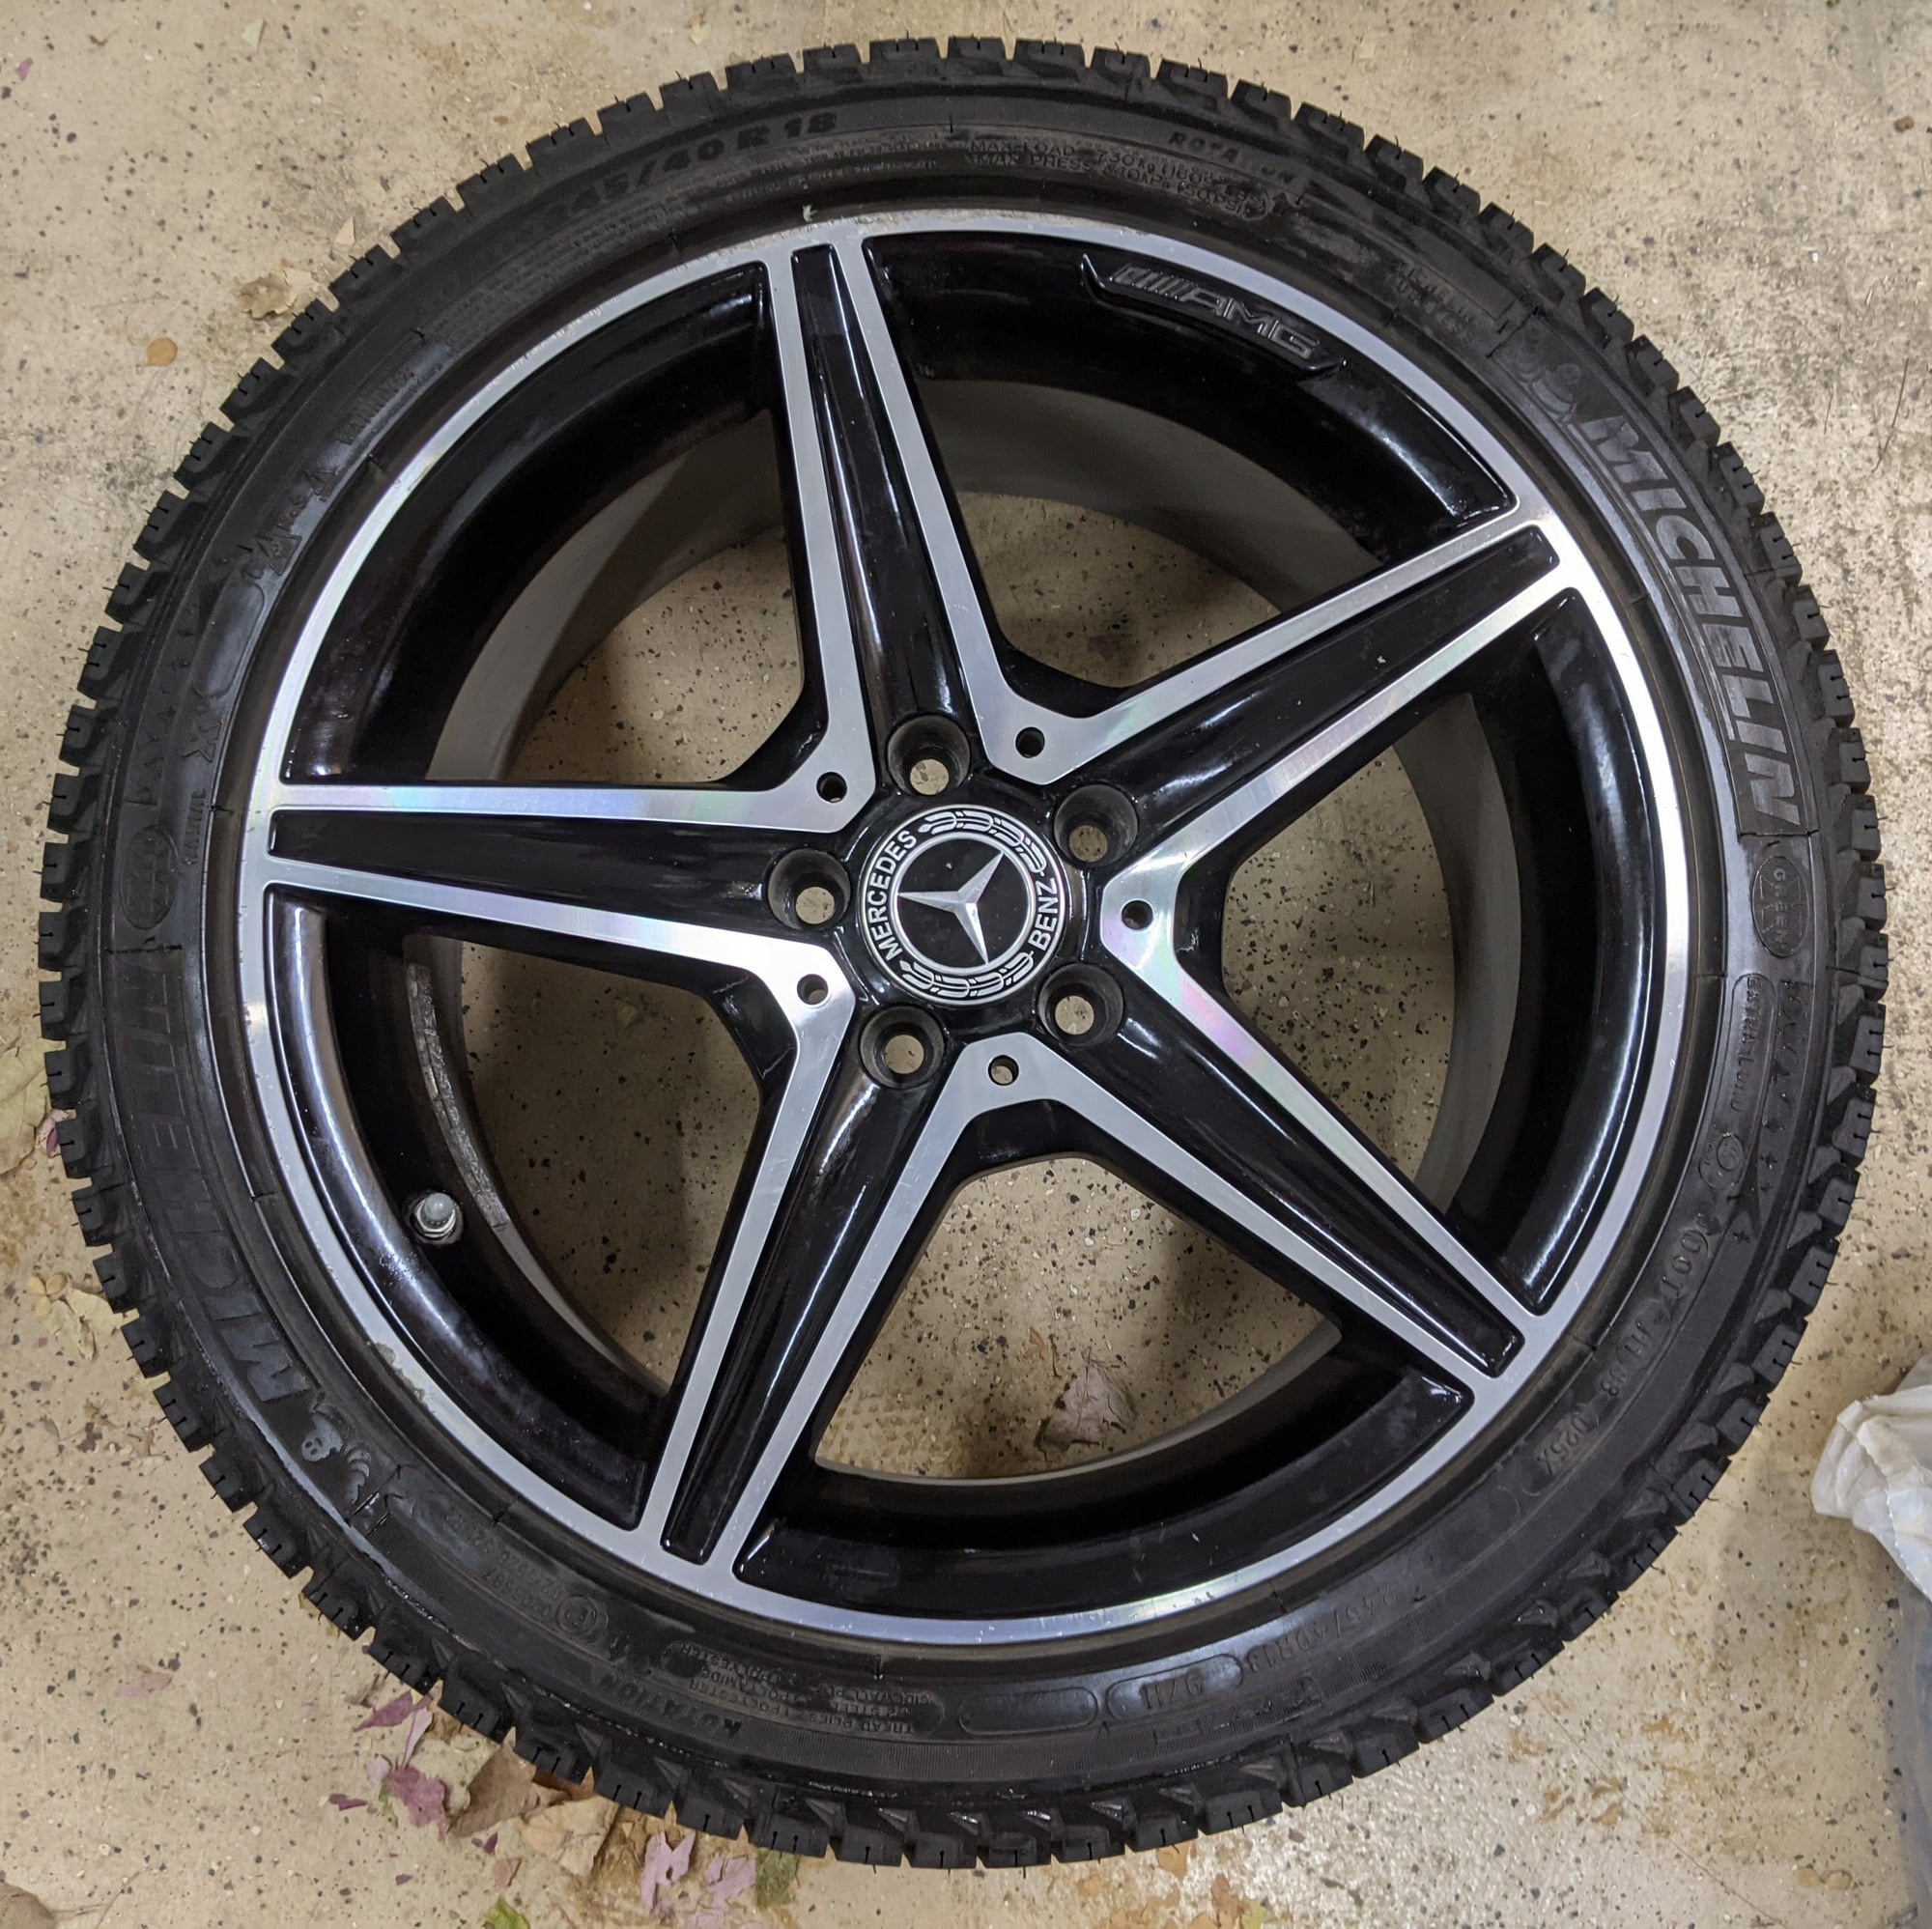 Wheels and Tires/Axles - W205 18" 5-spoke AMG wheels - Used - 2015 to 2020 Mercedes-Benz C300 - Chaska, MN 55318, United States